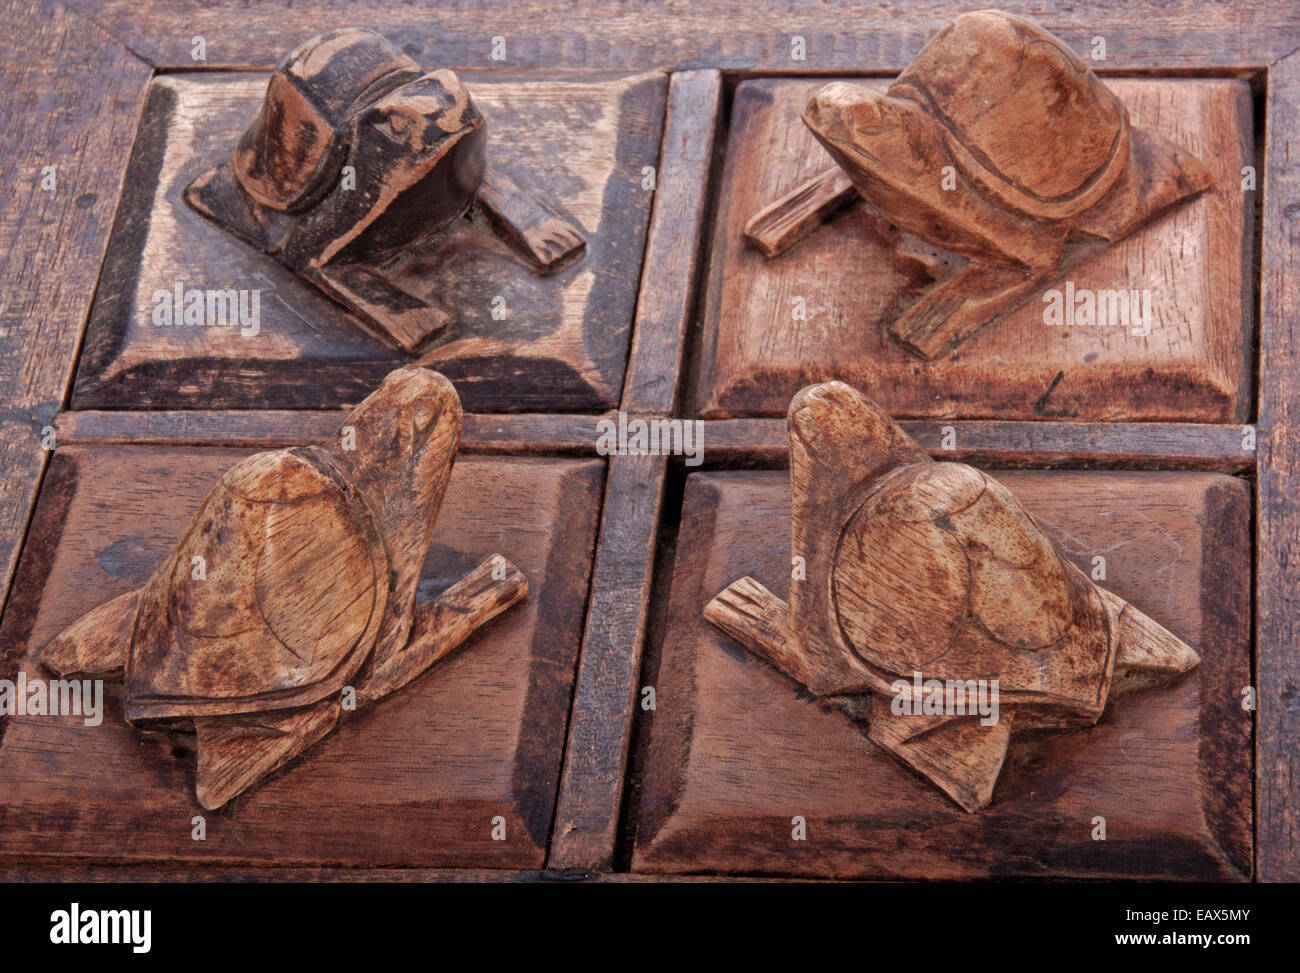 carved wooden turtles on trinket box compartment lids Stock Photo